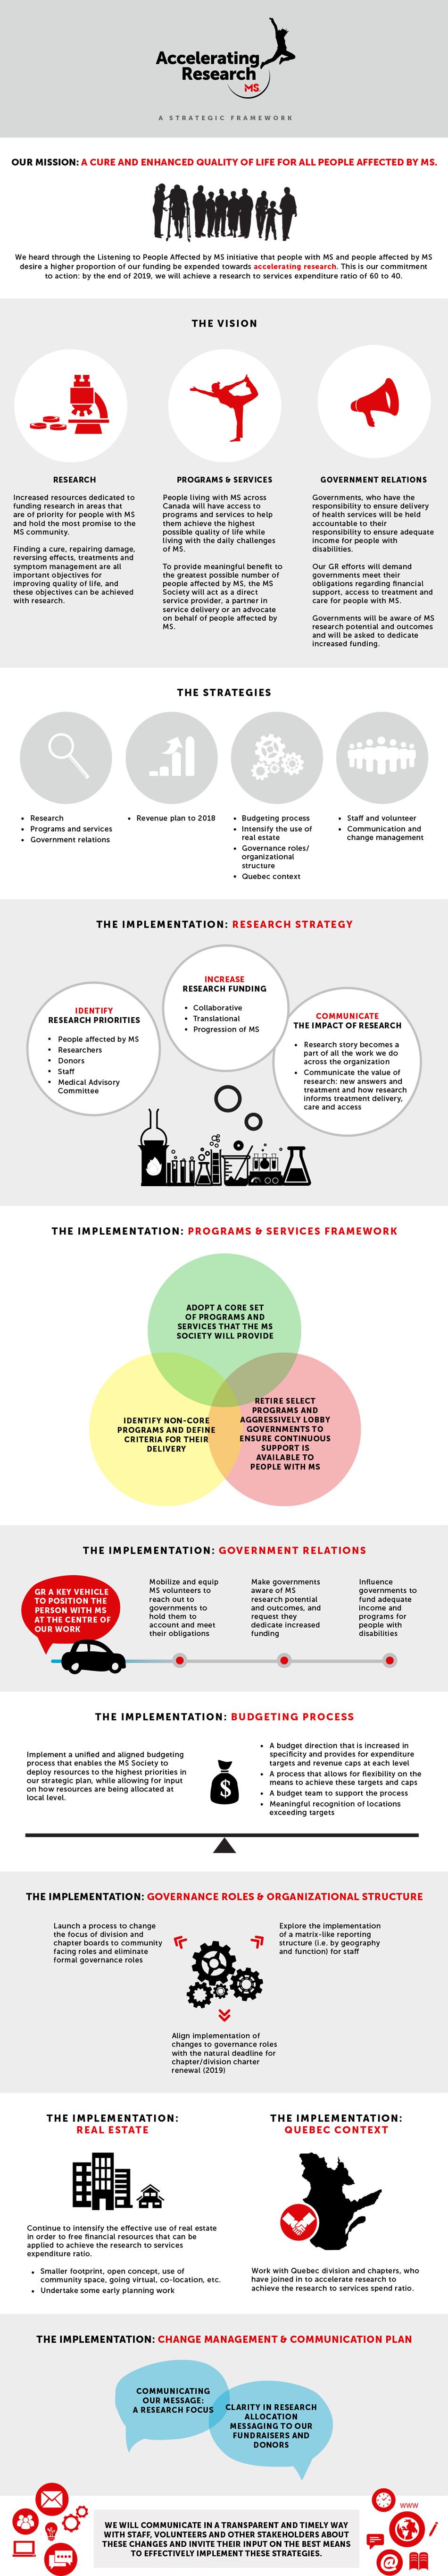 Accelerating Research infographic - click to download